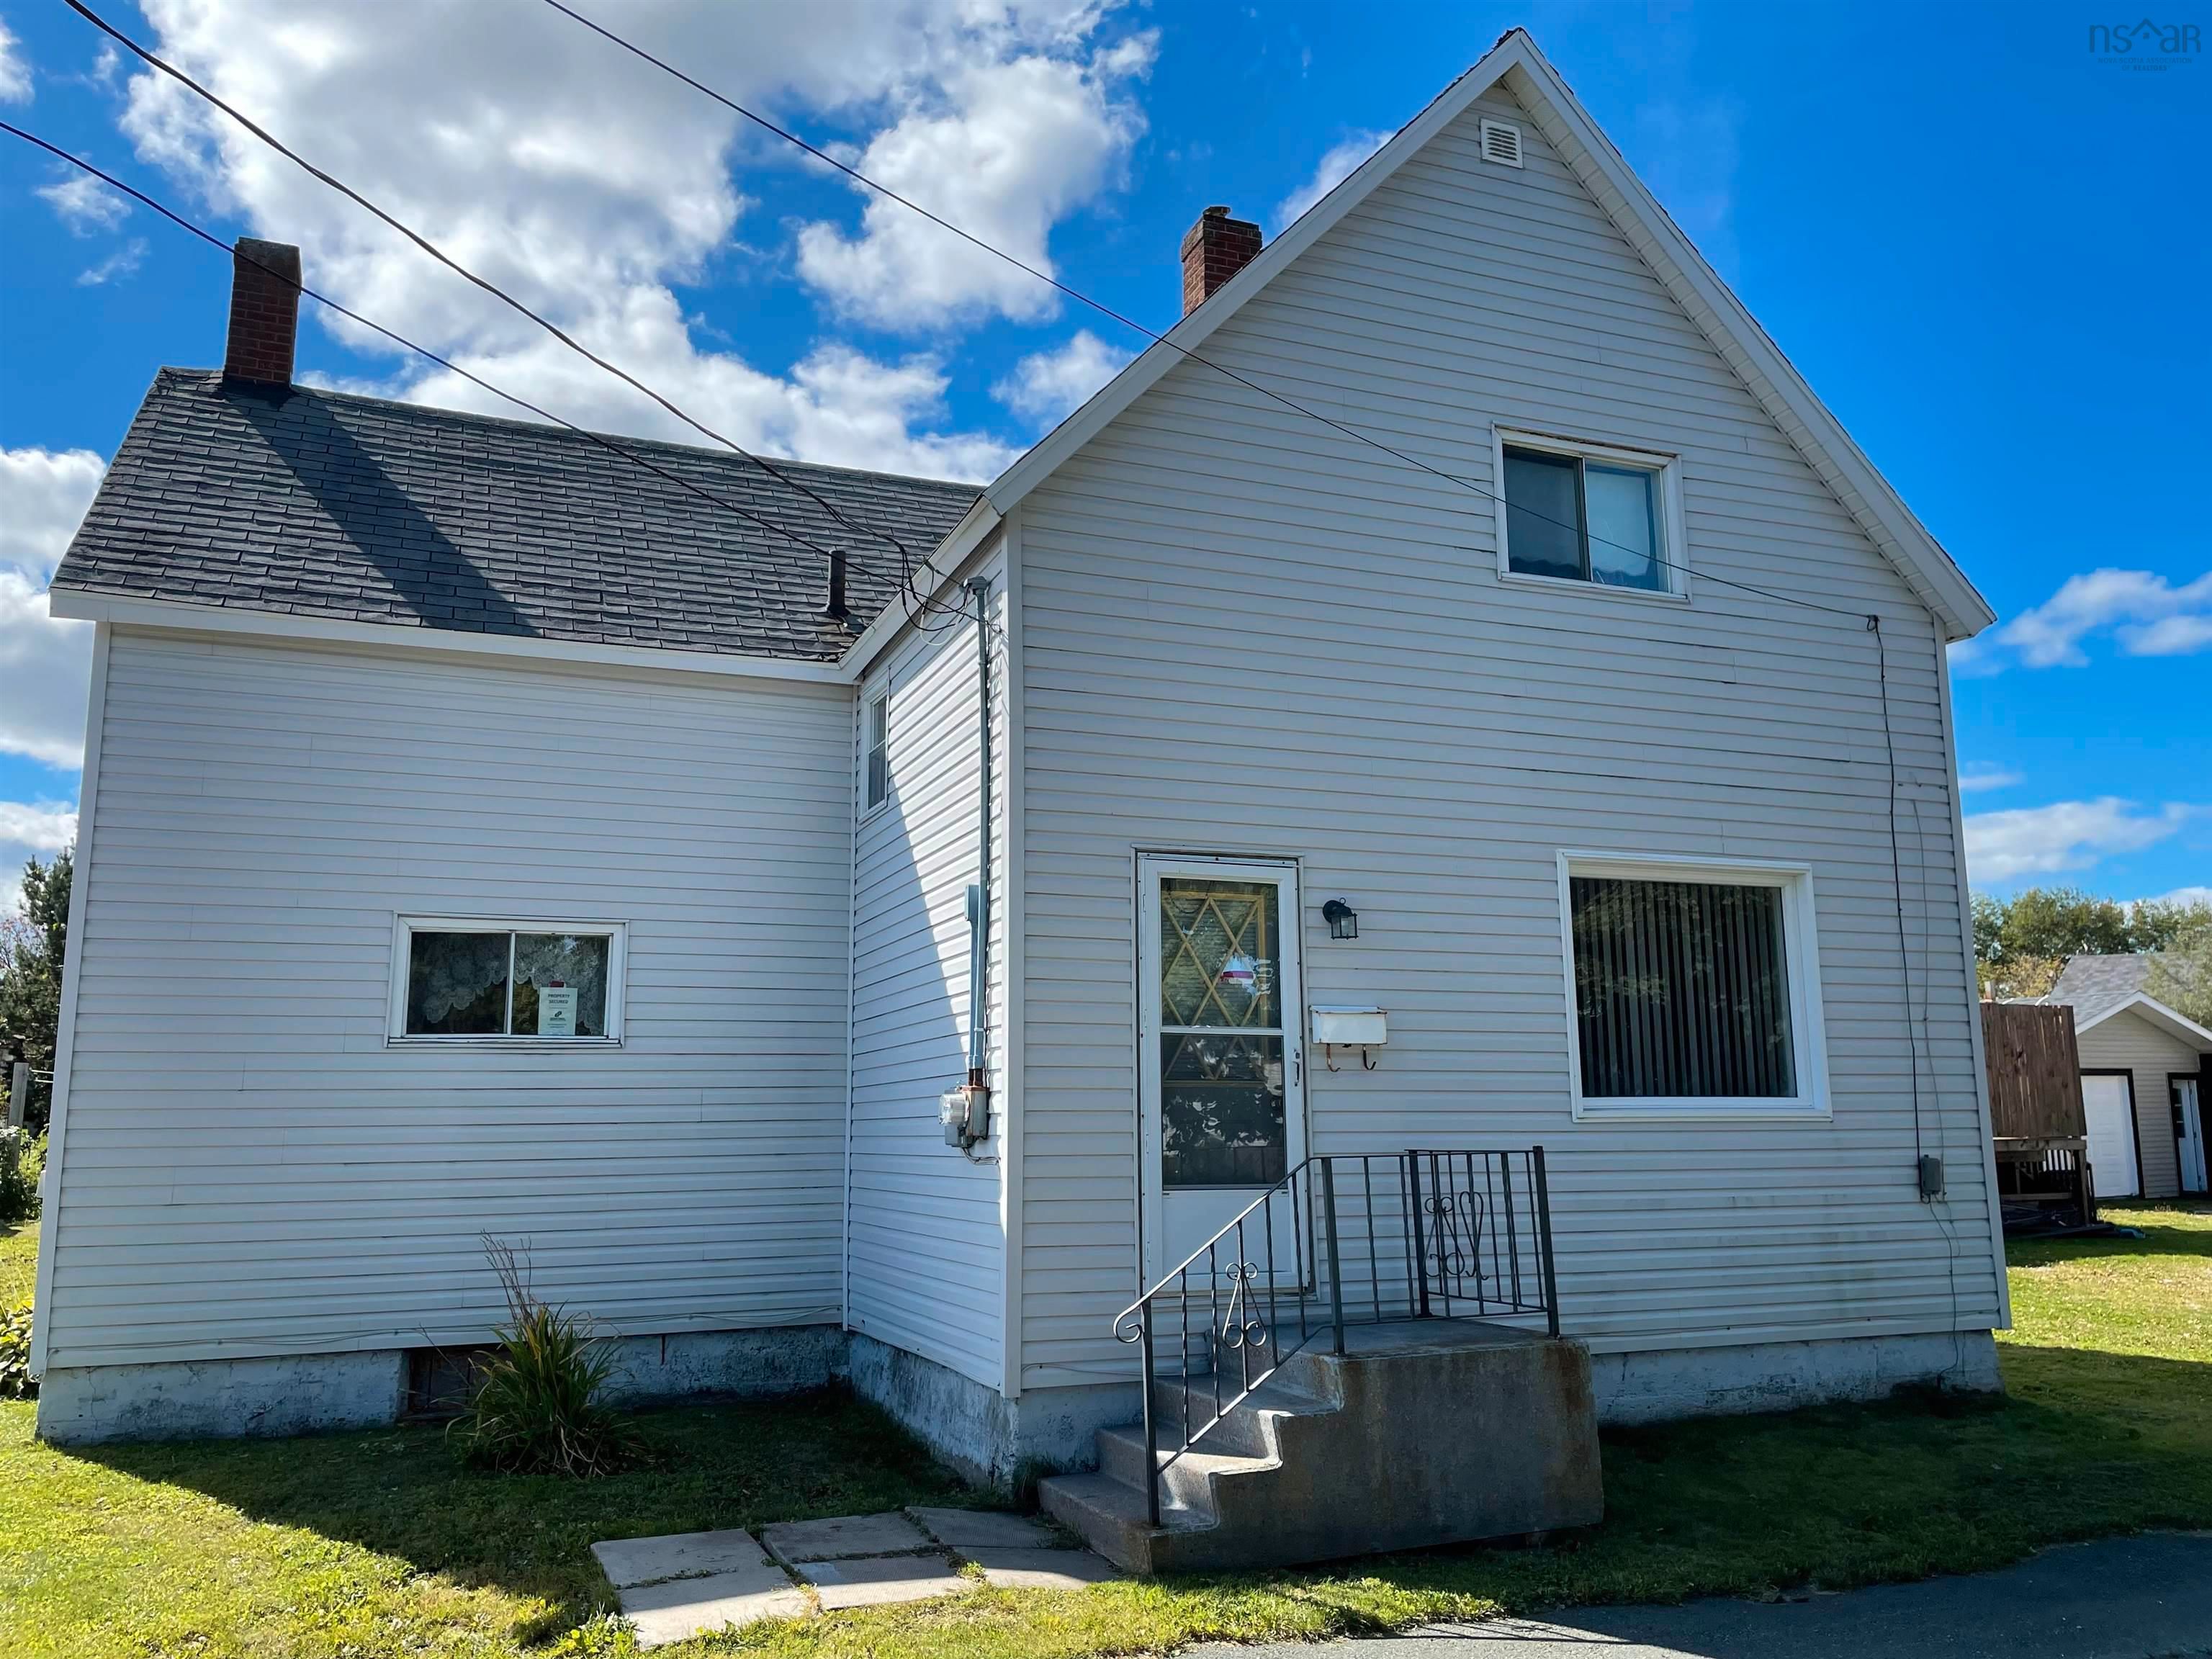 Main Photo: 21 MCKEIGAN Street in Glace Bay: 203-Glace Bay Residential for sale (Cape Breton)  : MLS®# 202222908